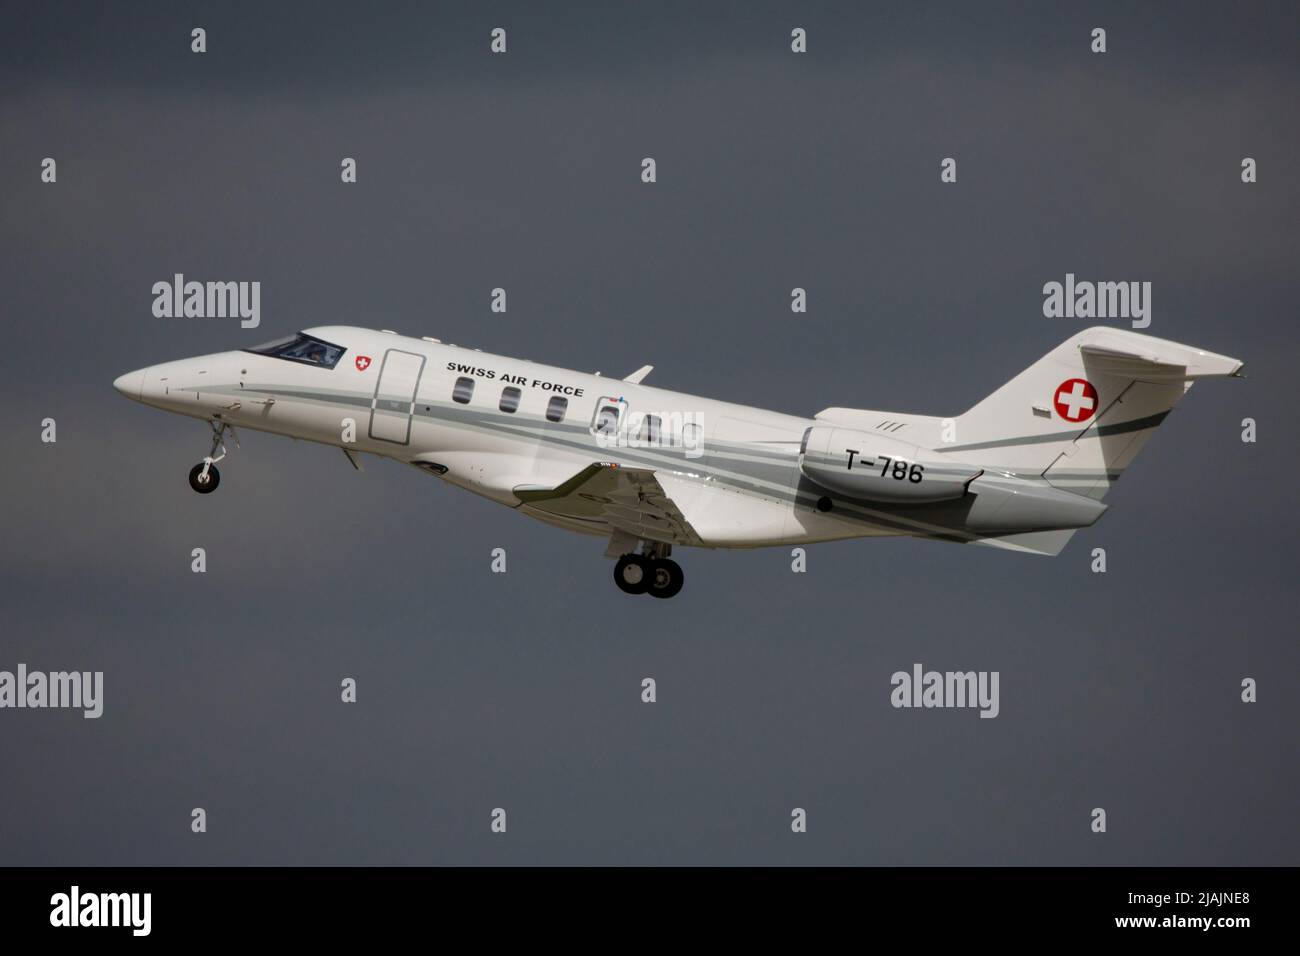 Swiss Air Force PC-24 VIP jet, Dresden, Germany. Stock Photo